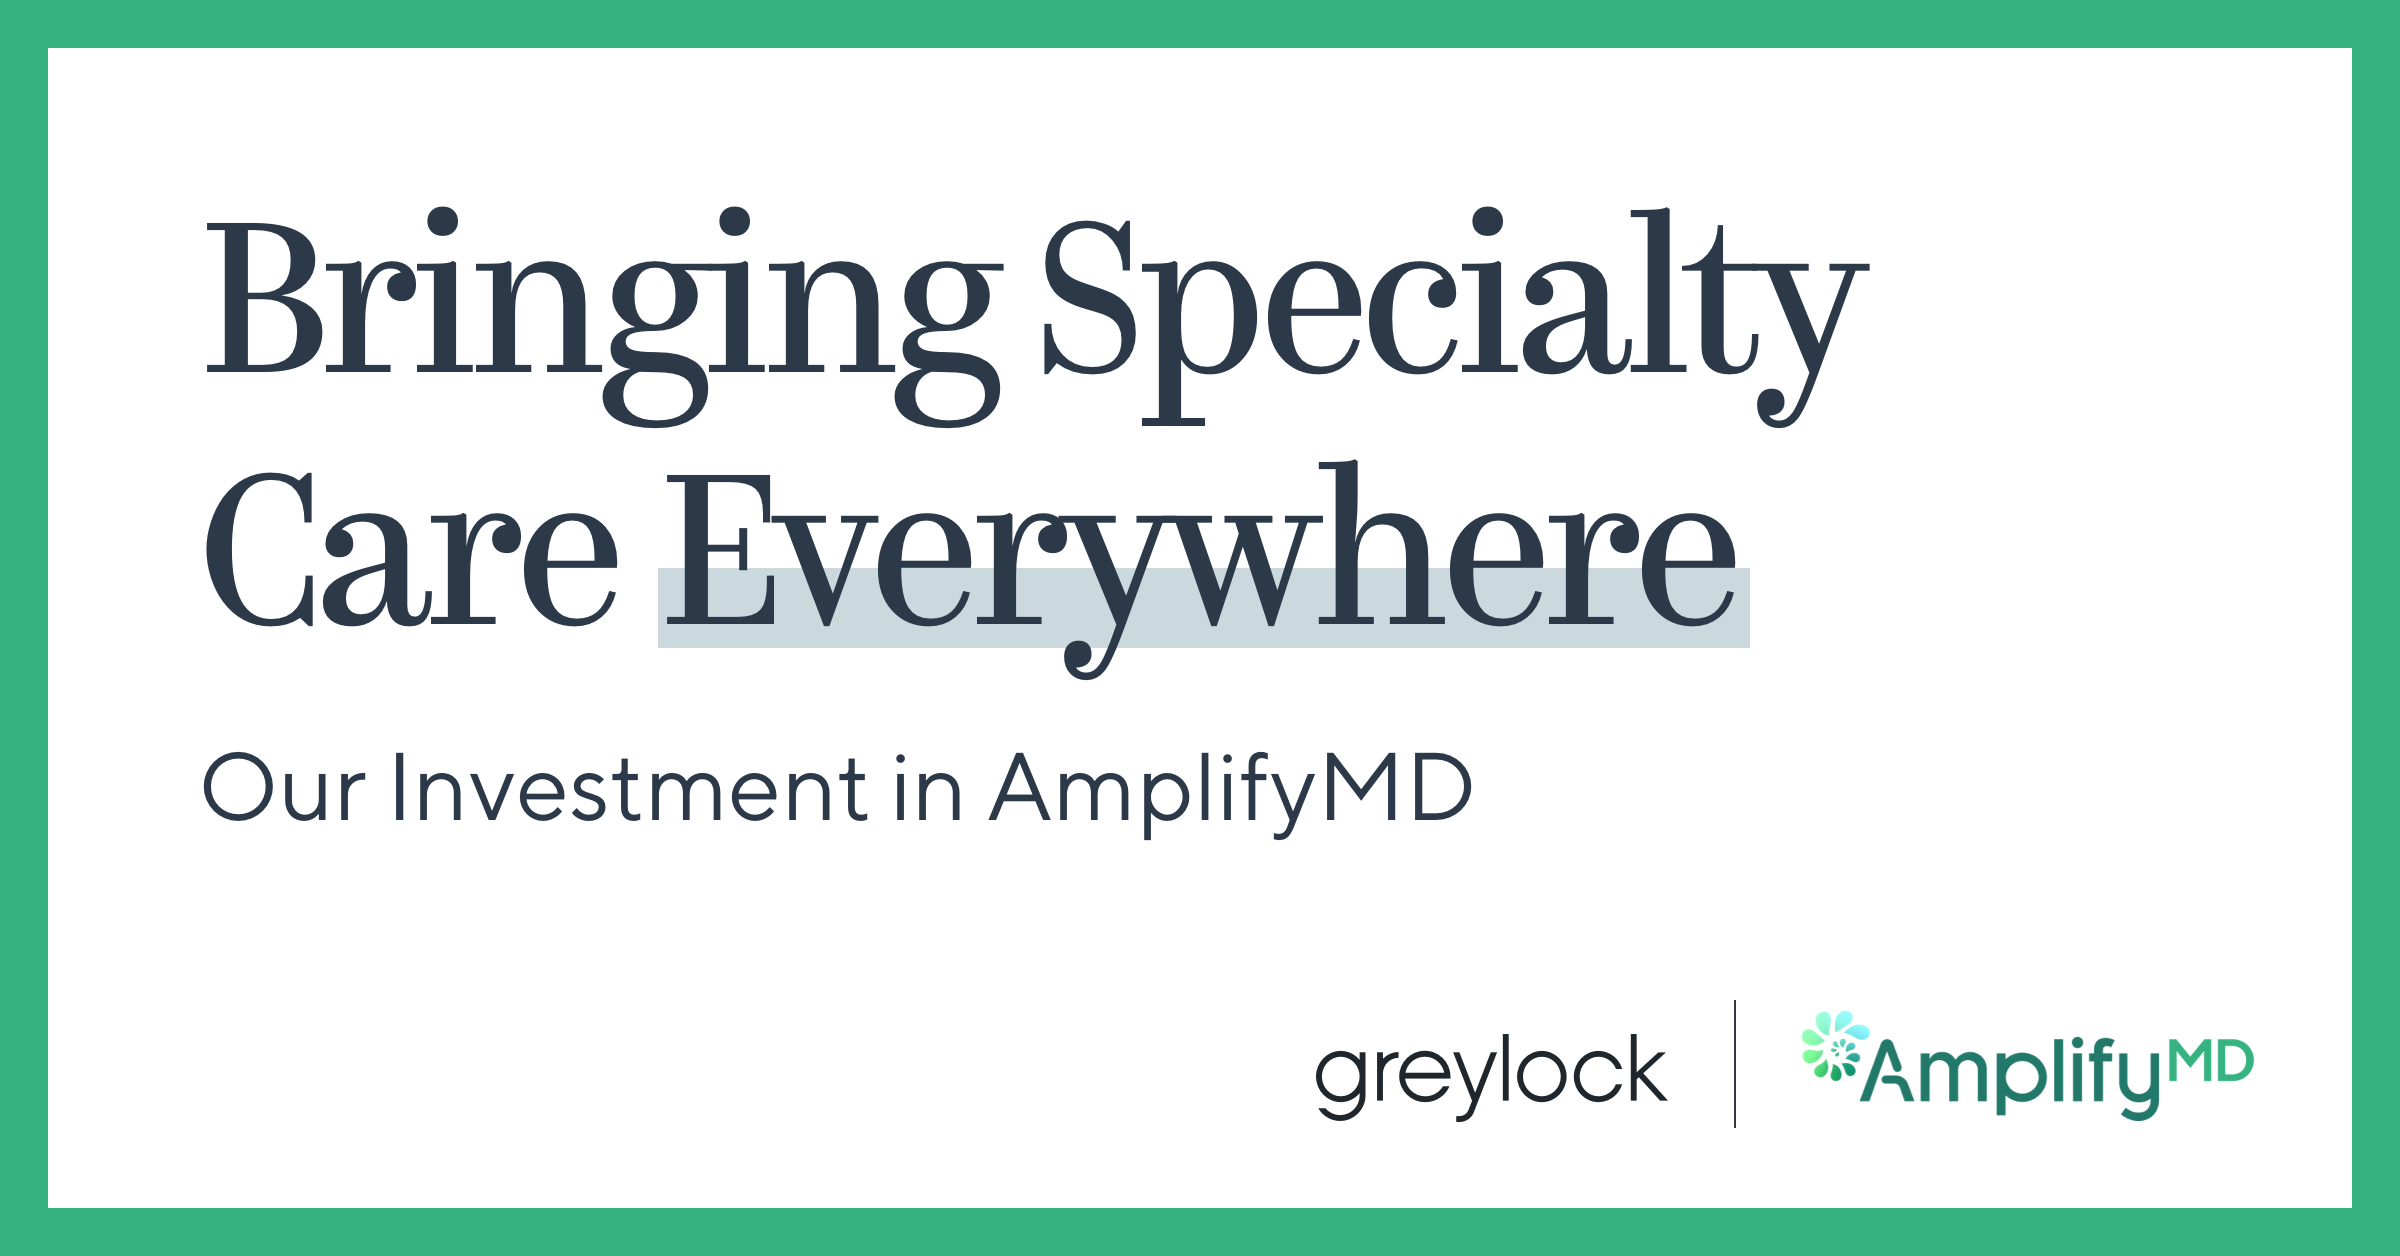 Bringing Specialty Care Everywhere